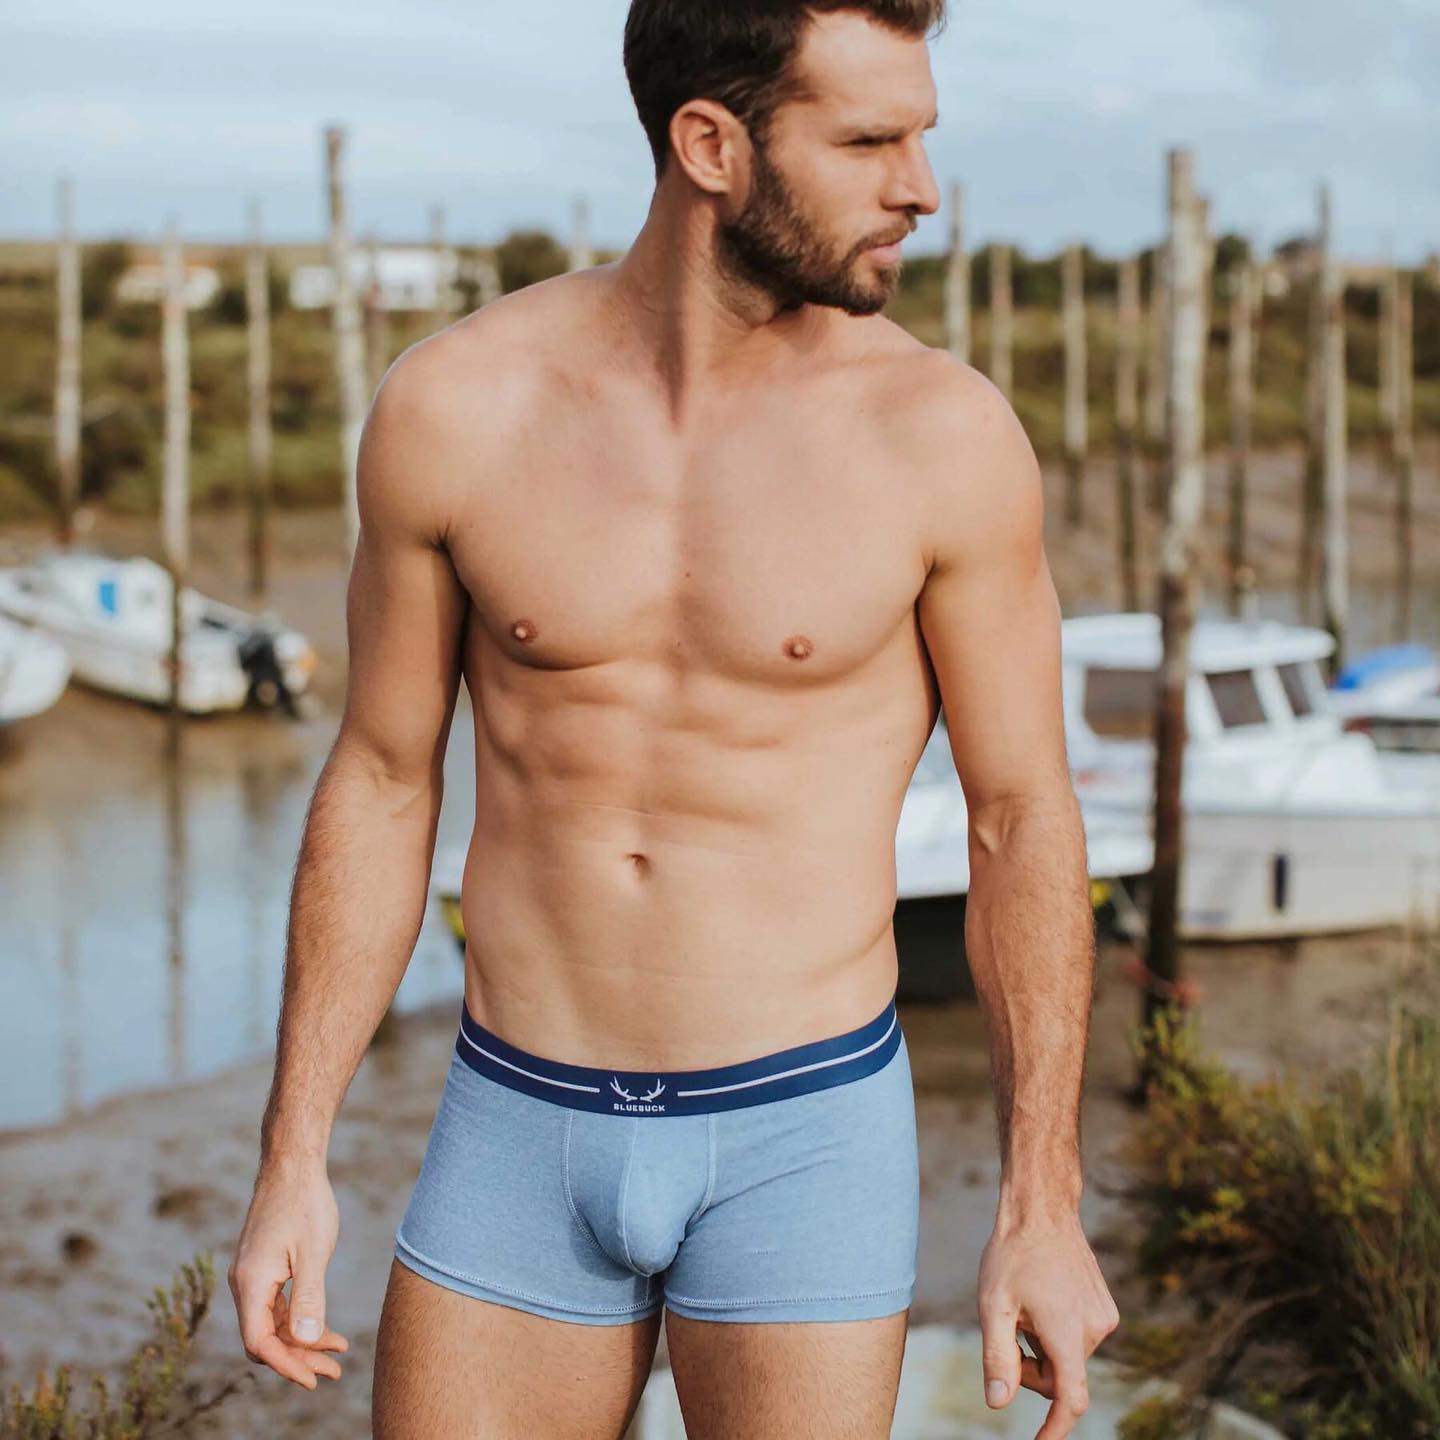 Made with a unique mix of organic cotton, Seaqual and elastane in a timeless style and a contemporary colour. Discover, today, the Blue Yonder Trunks of Bluebuck:
____
https://menandunderwear.com/shop/underwear/bluebuck-blue-yonder-trunks